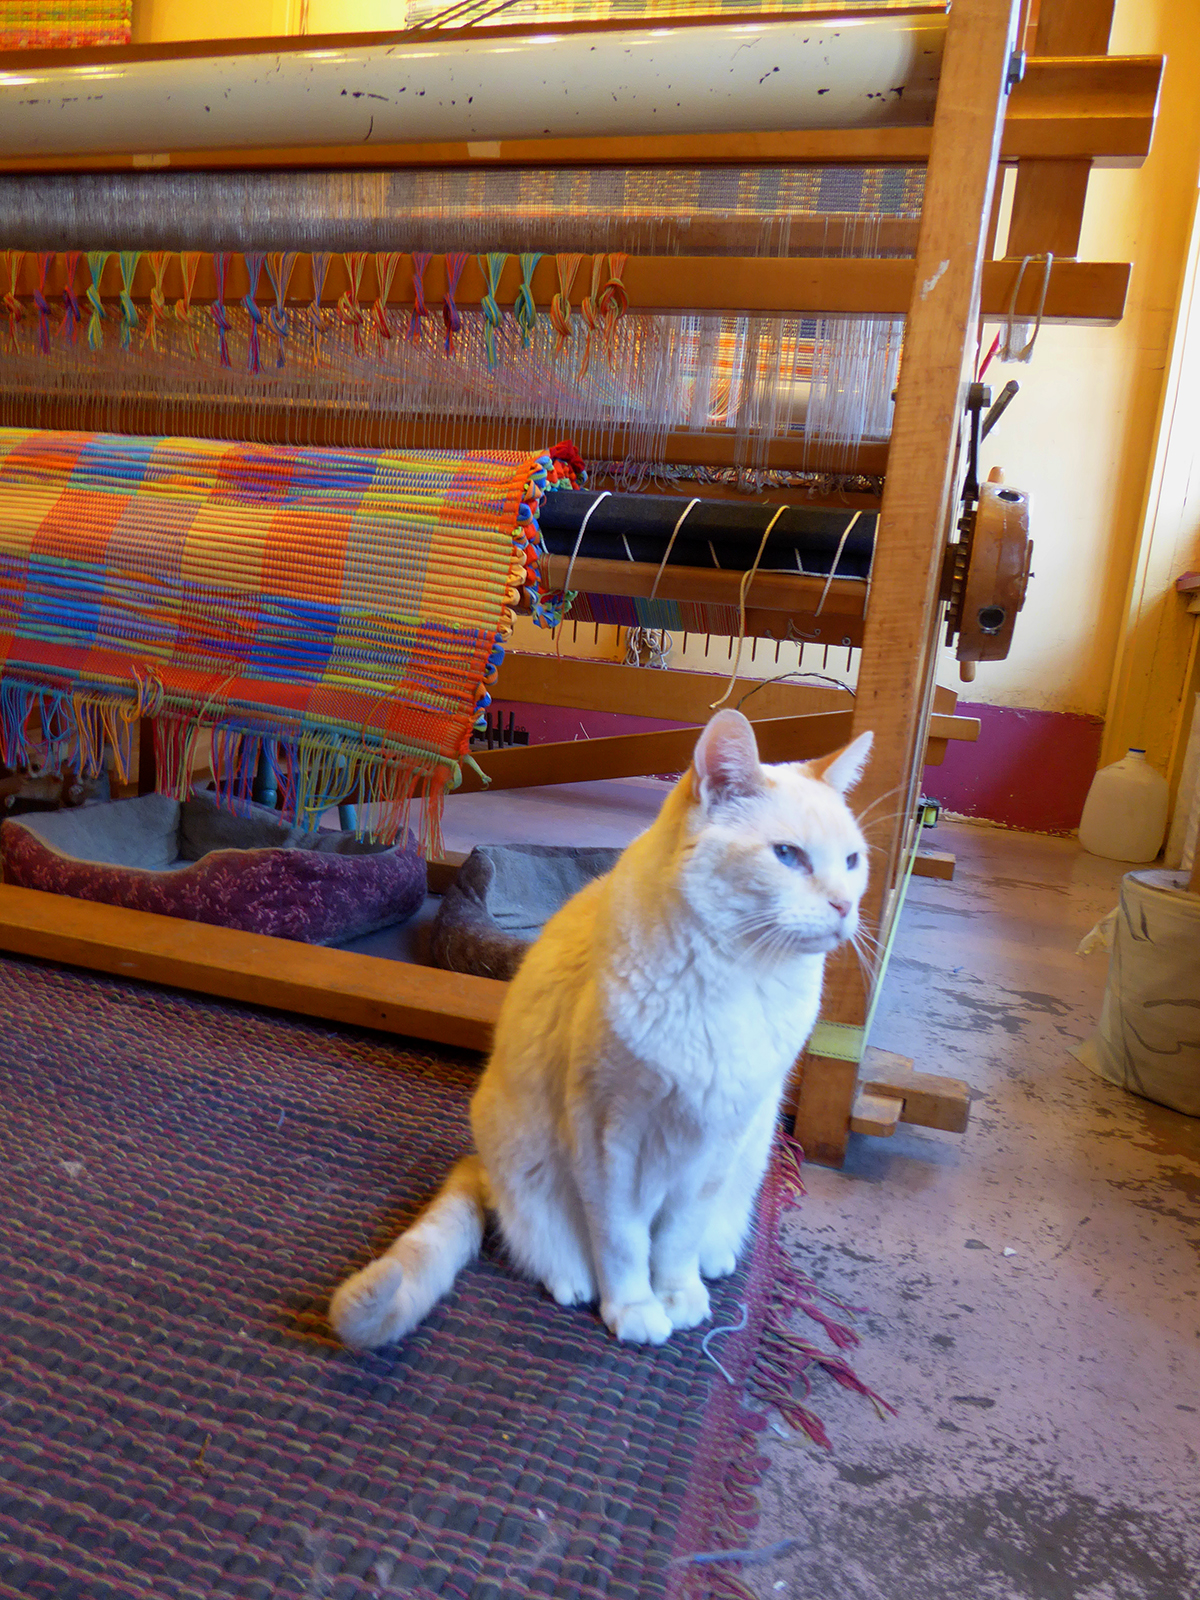 A Loom Works cat sits ready to greet visitors.